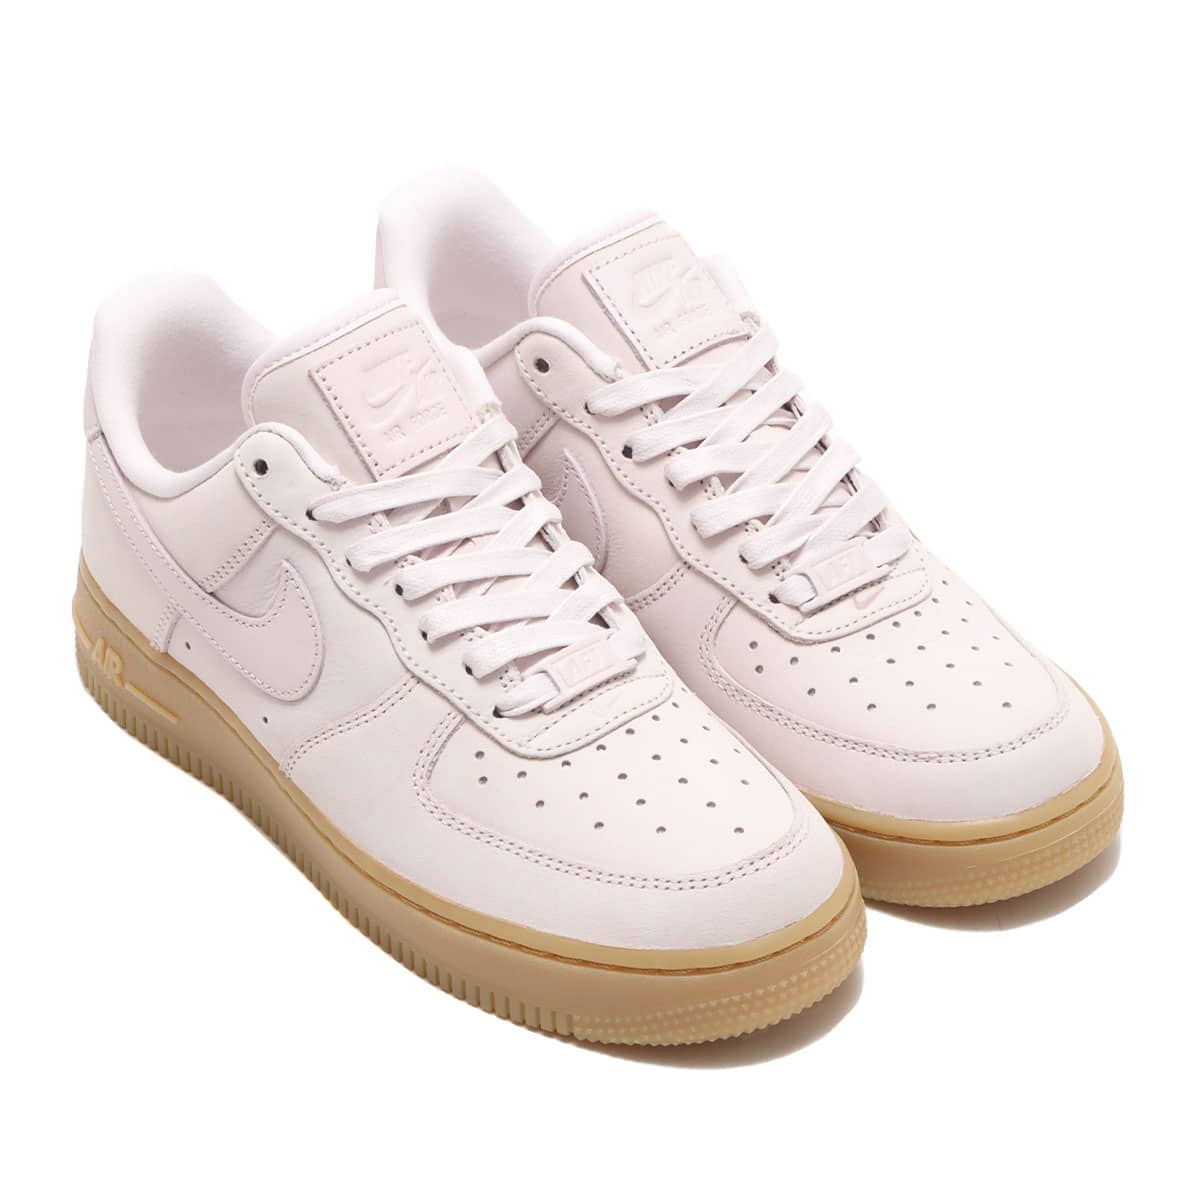 NIKE WMNS AIR FORCE 1 PRM MF PEARL PINK/PEARL PINK-GUM LIGHT BROWN 23SU-I_photo_large